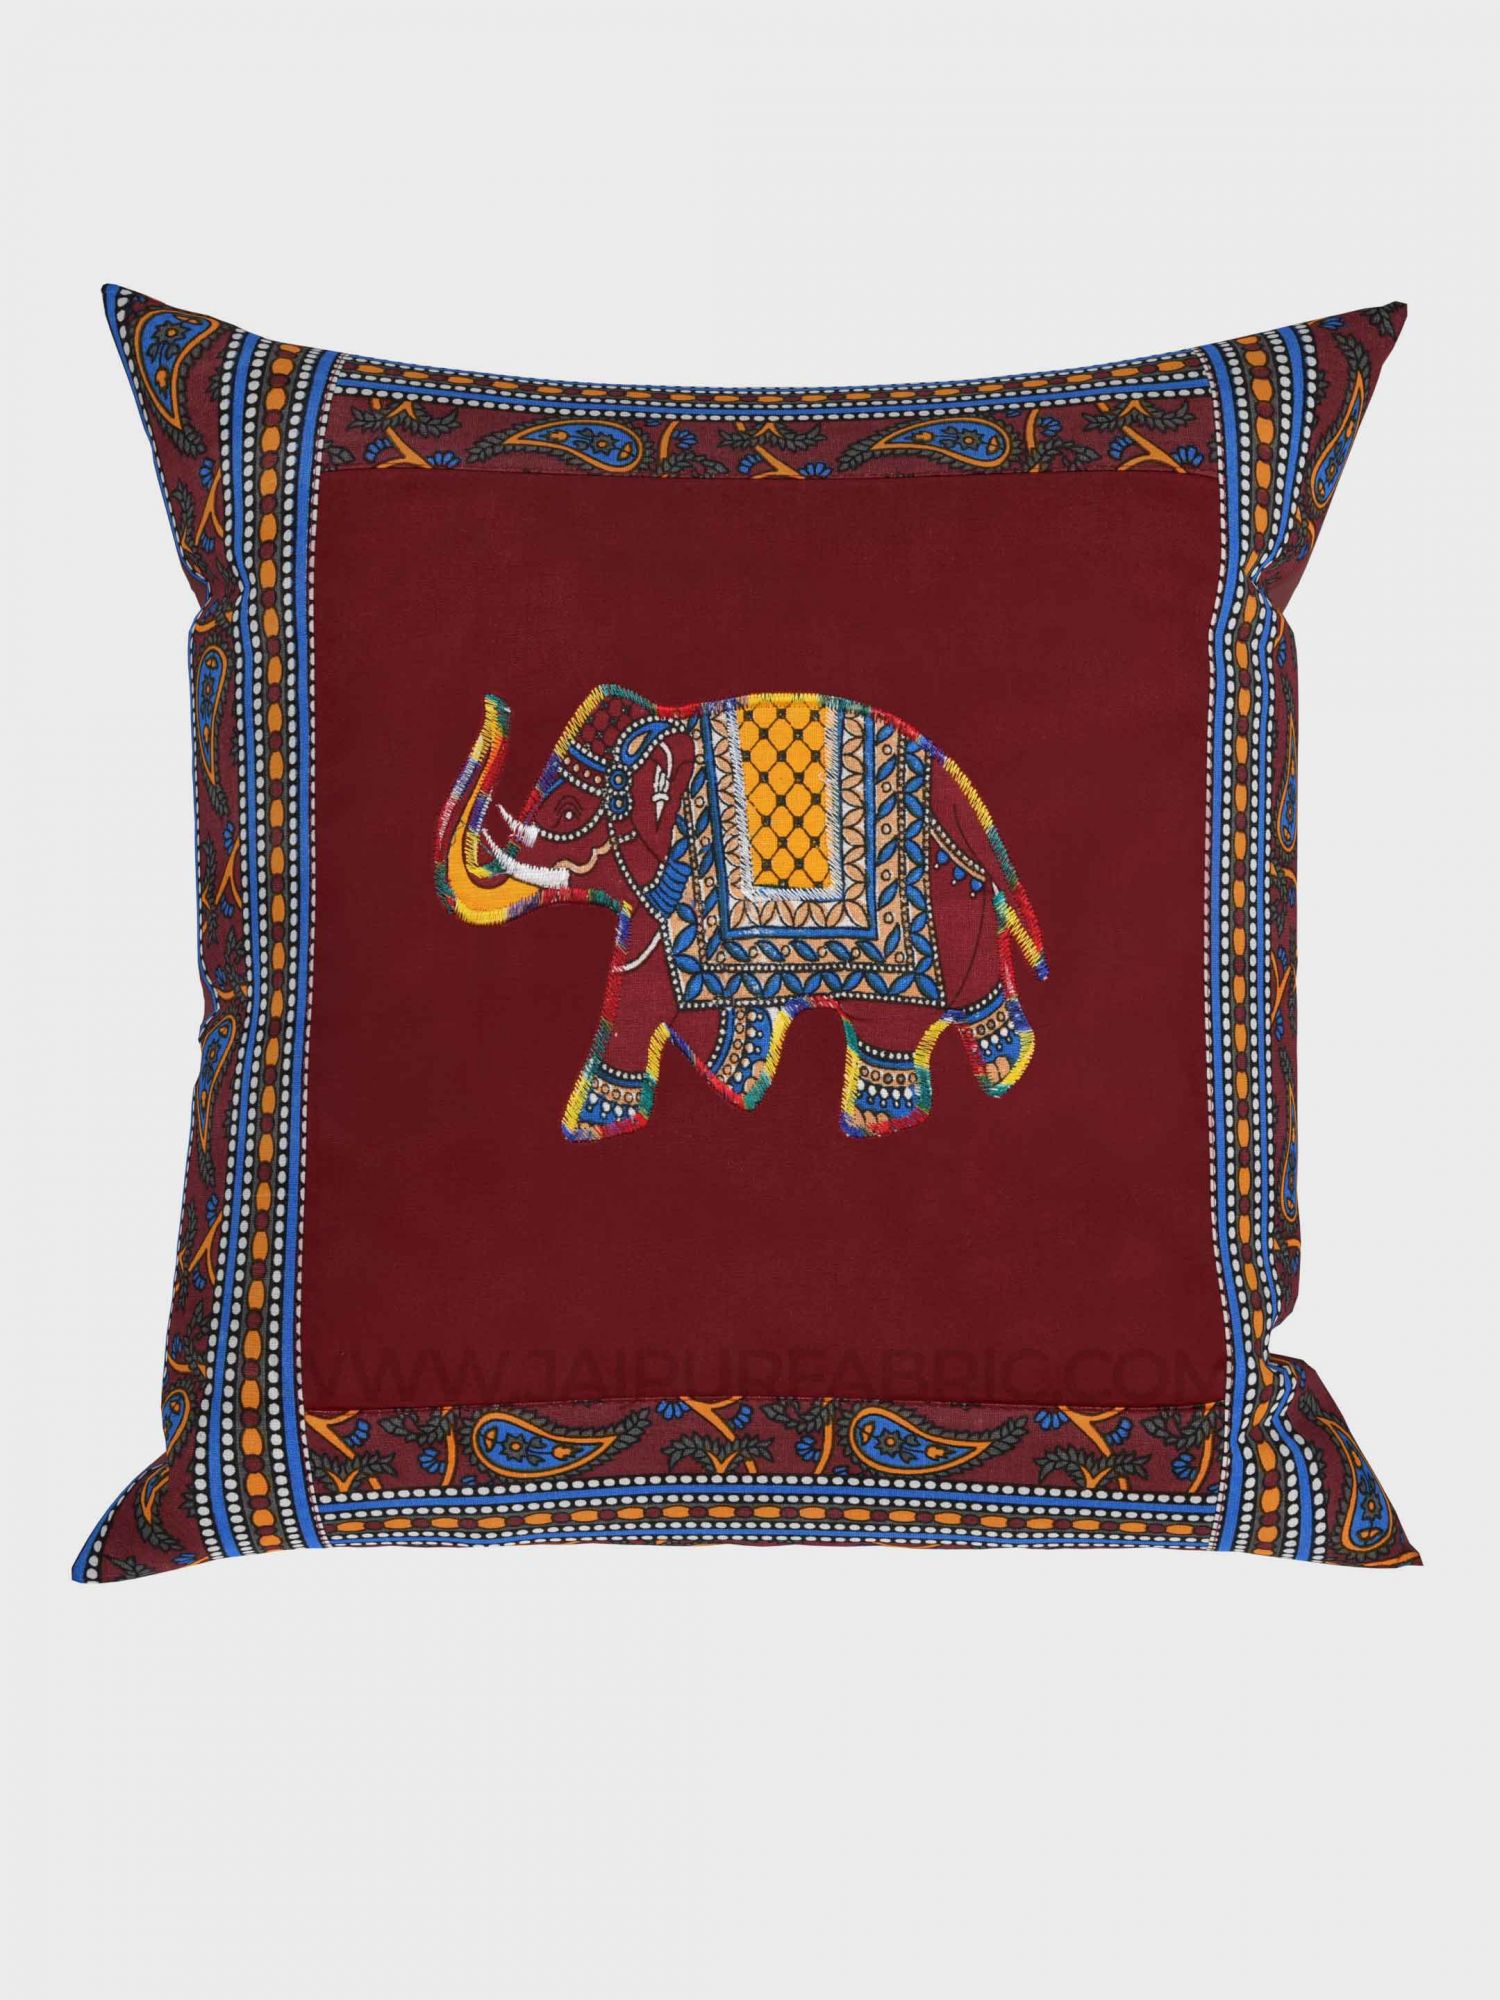 Applique Maroon Elephant Jaipuri Hand Made Embroidery Patch Work Cushion Cover